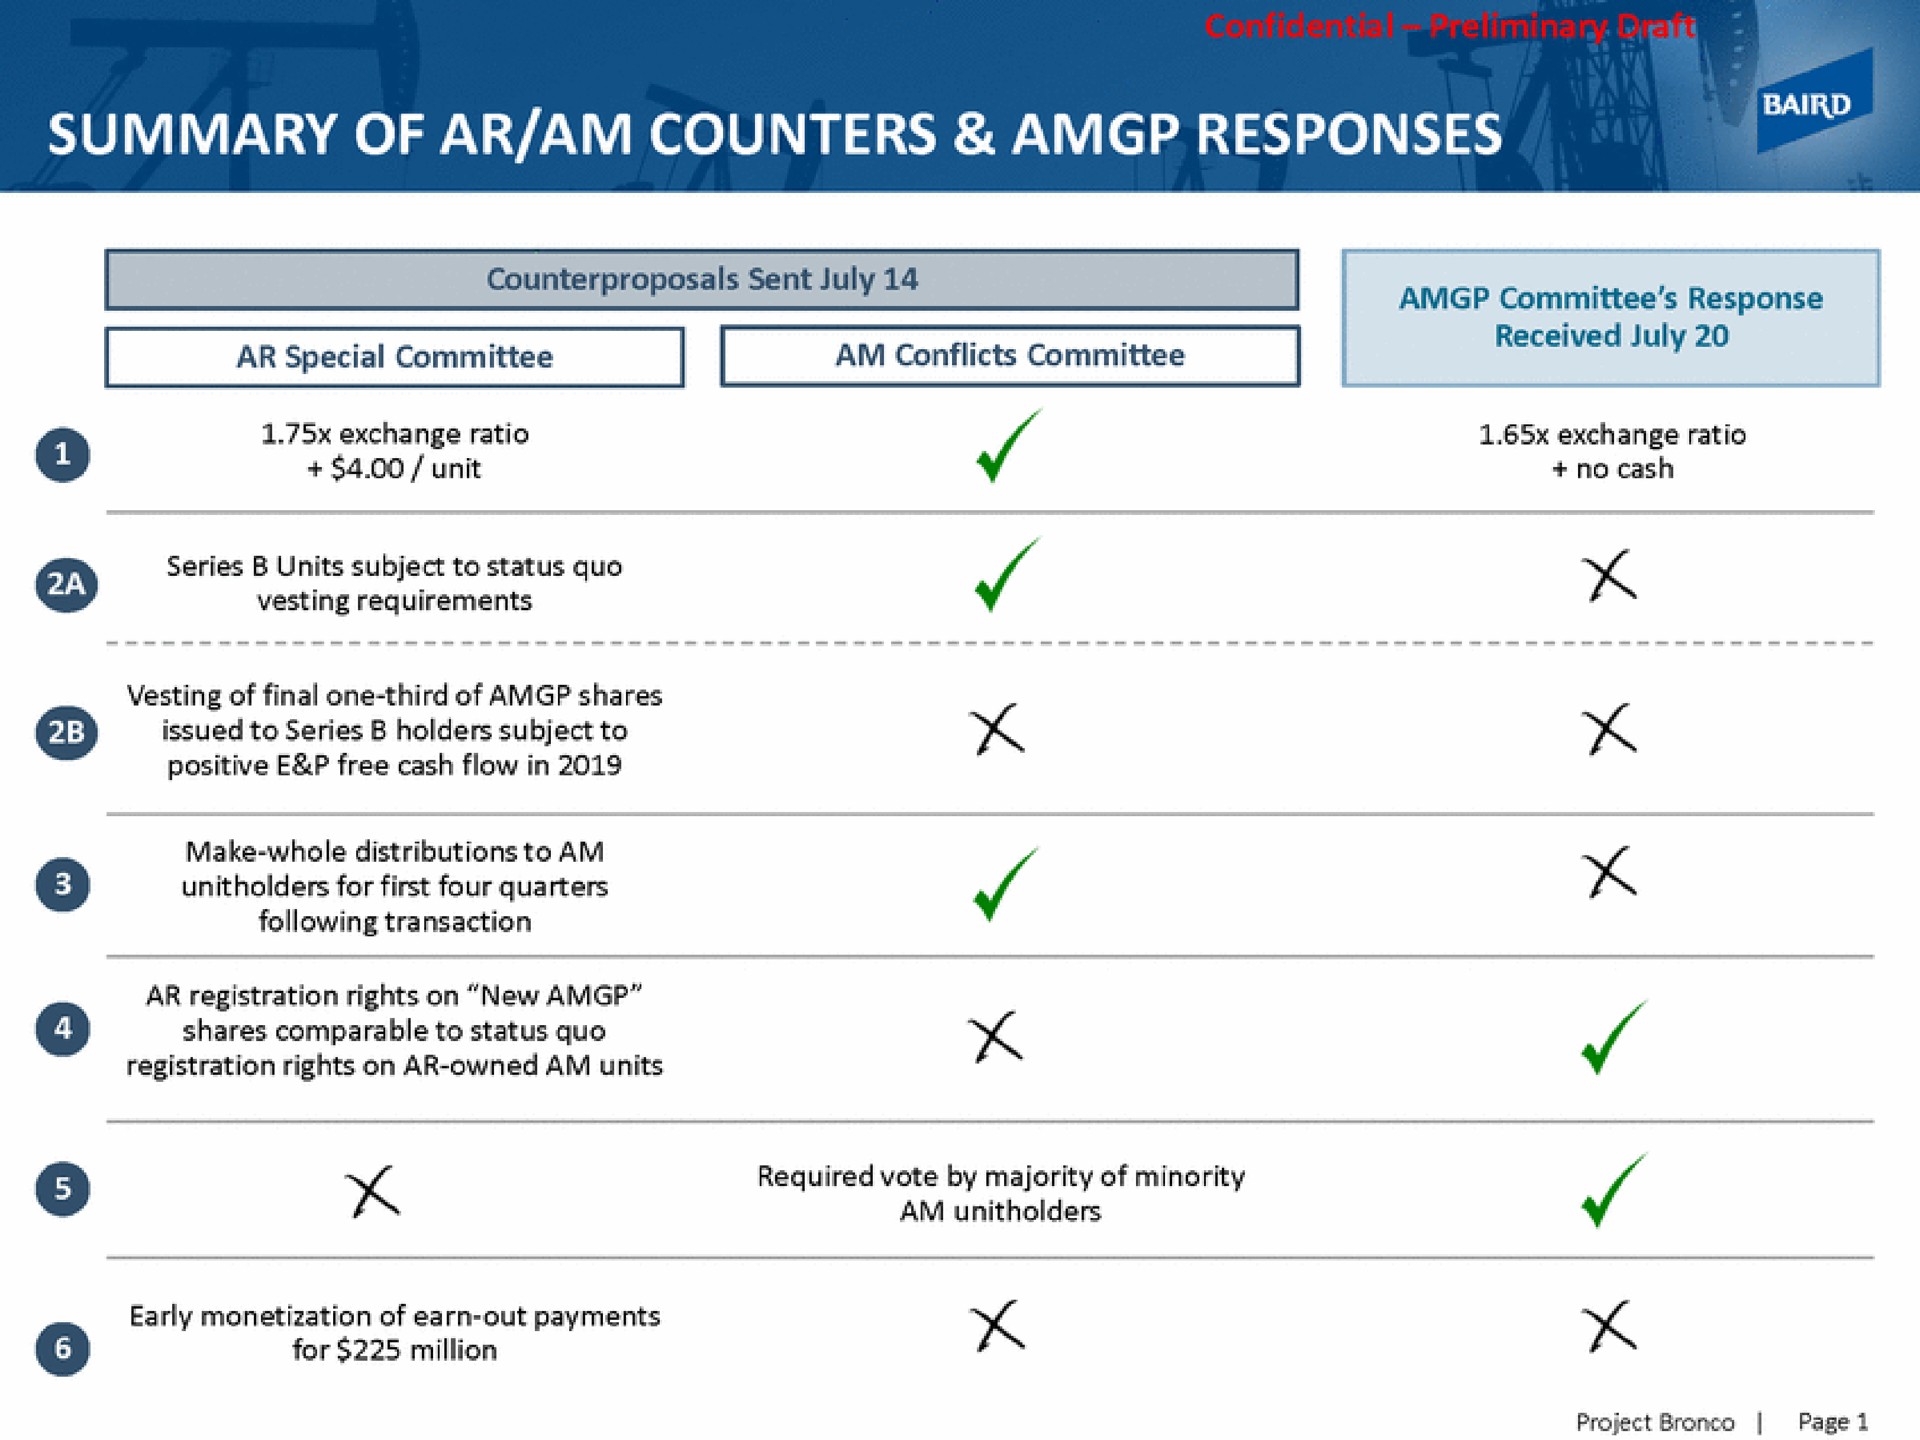 summary of am counters responses | Baird